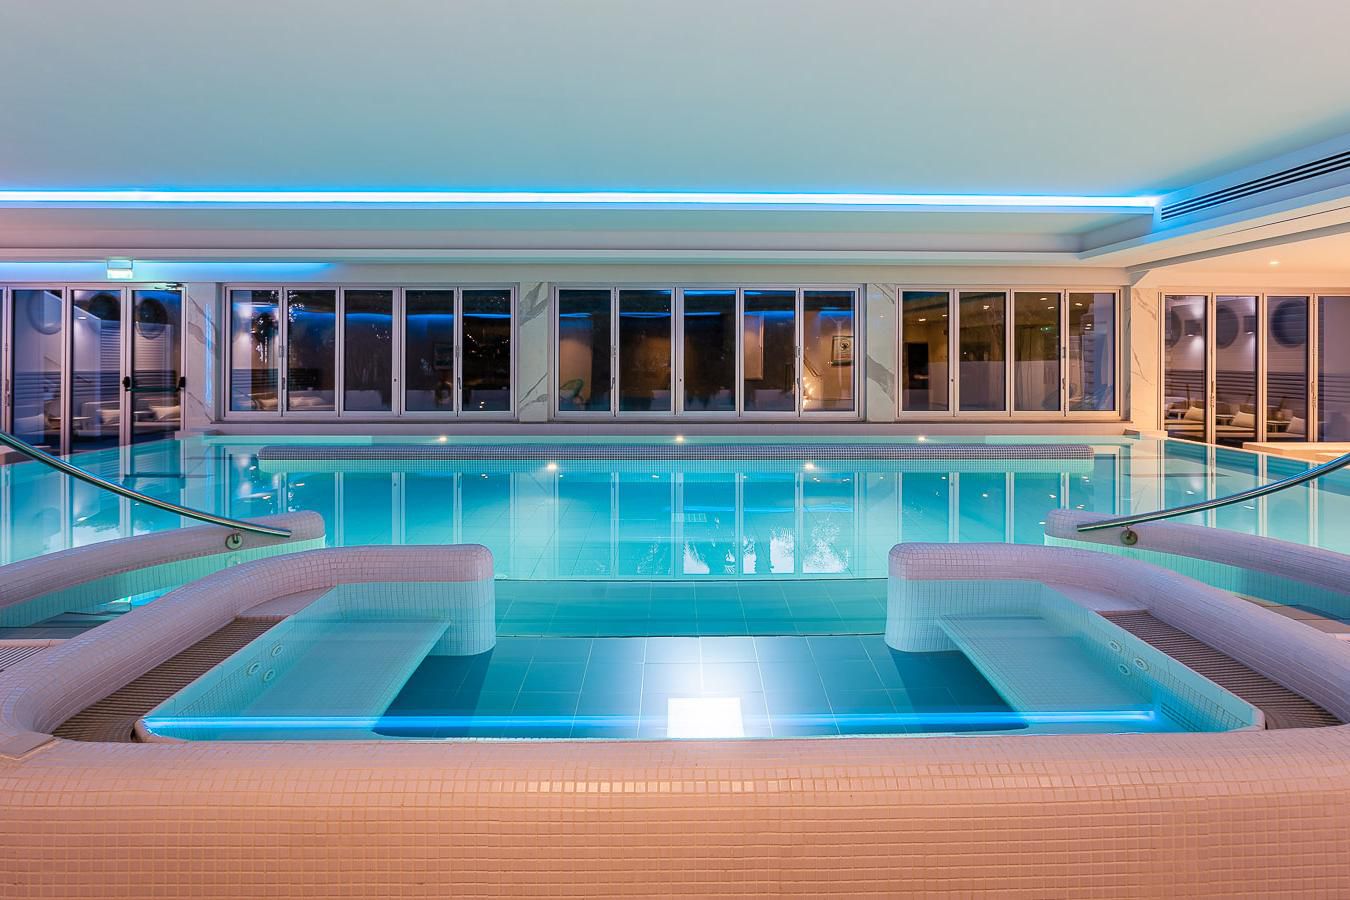 Enjoy a dip in our renovated indoor pool 